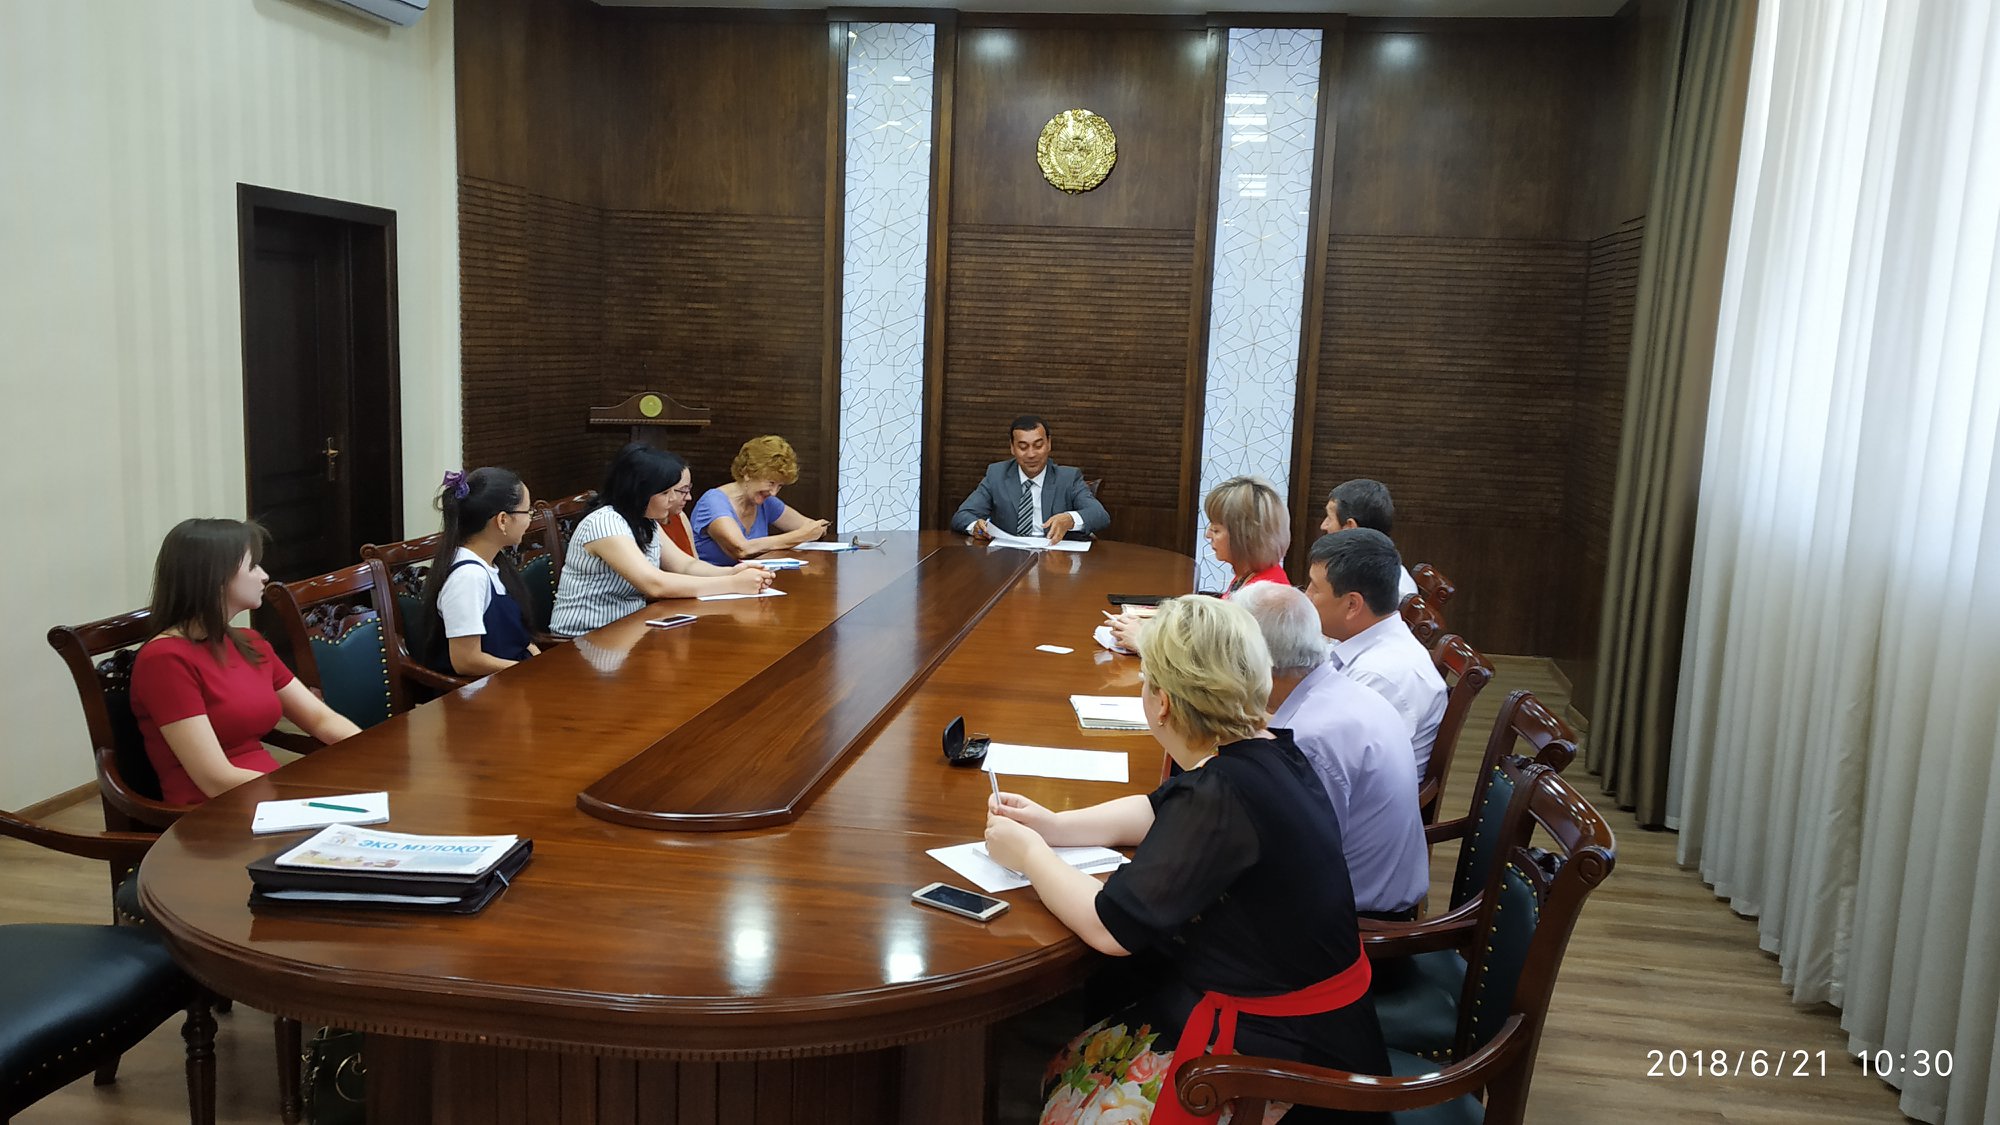 The renewal of the dialogue between public organizations, the media and the State Ecology Committee of Uzbekistan